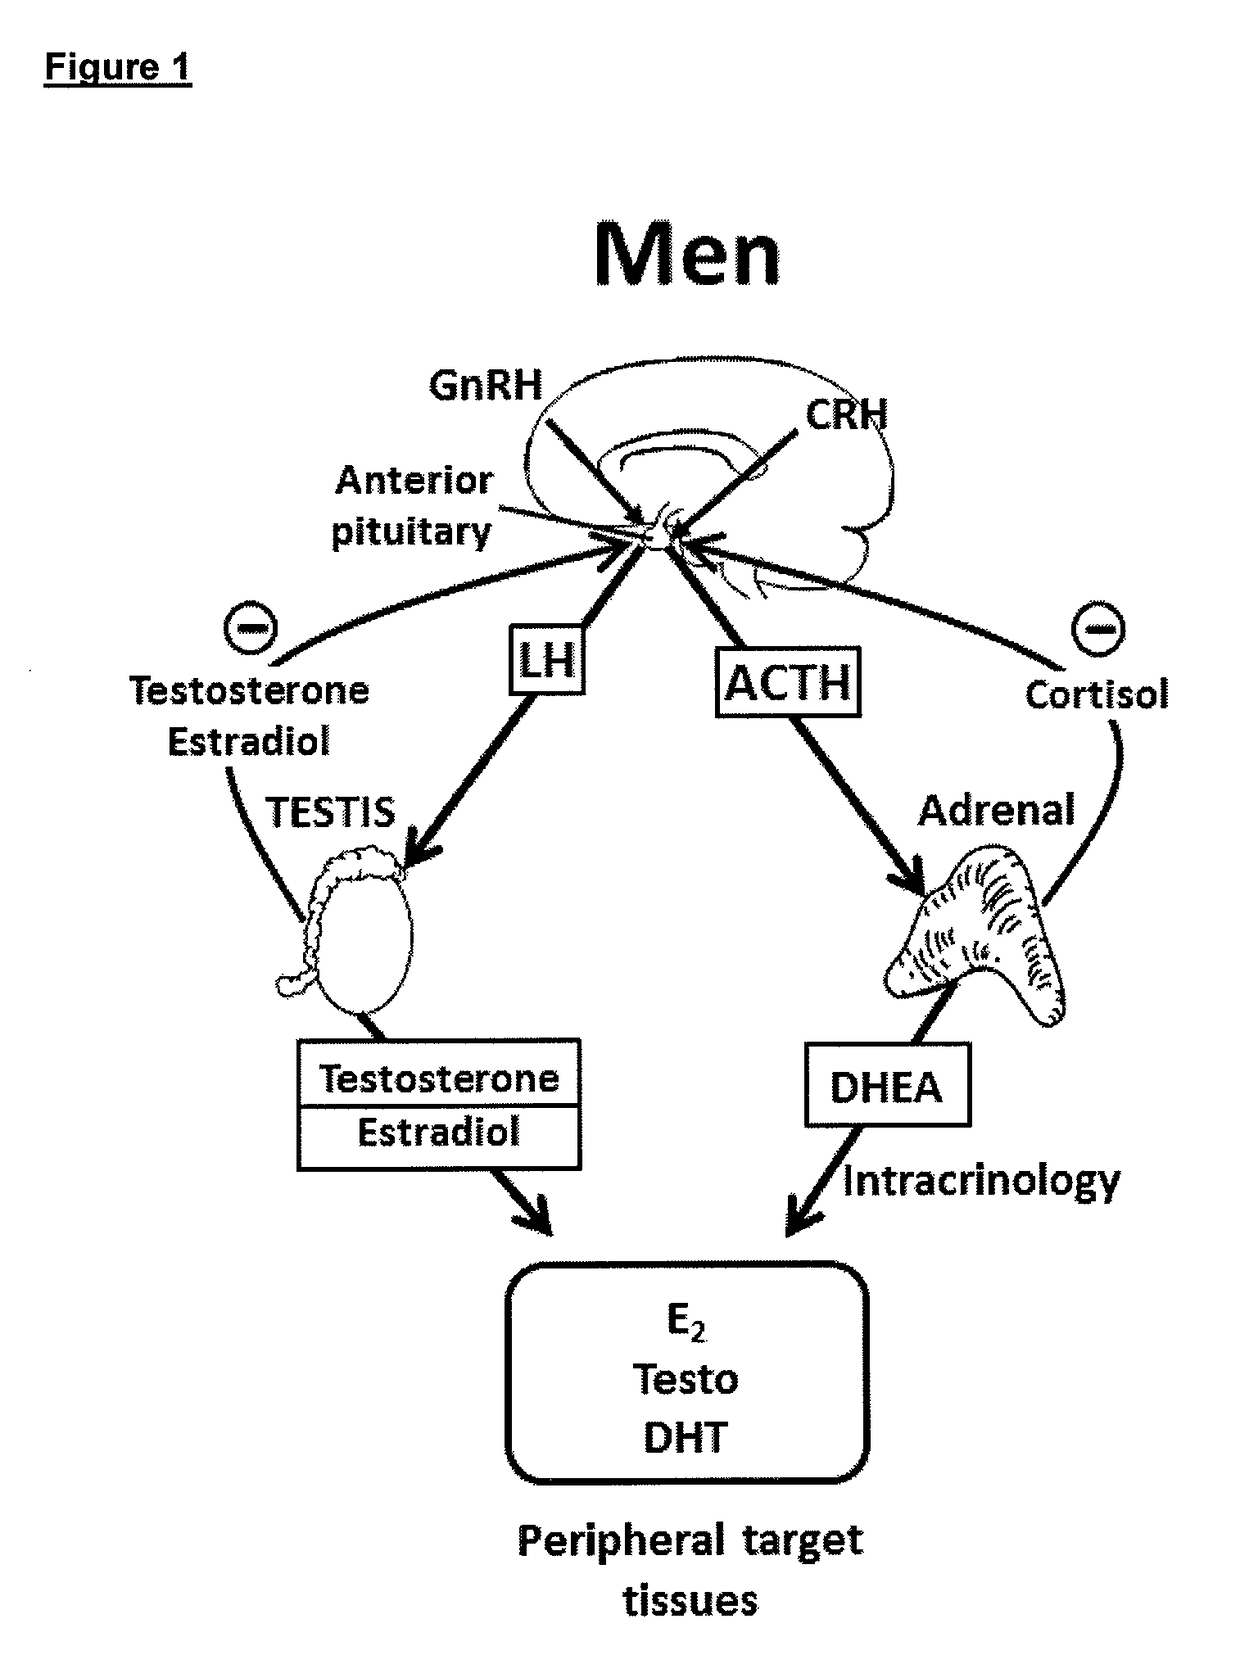 Treatment of male androgen deficiency symptoms or diseases with sex steroid precursor combined with SERM